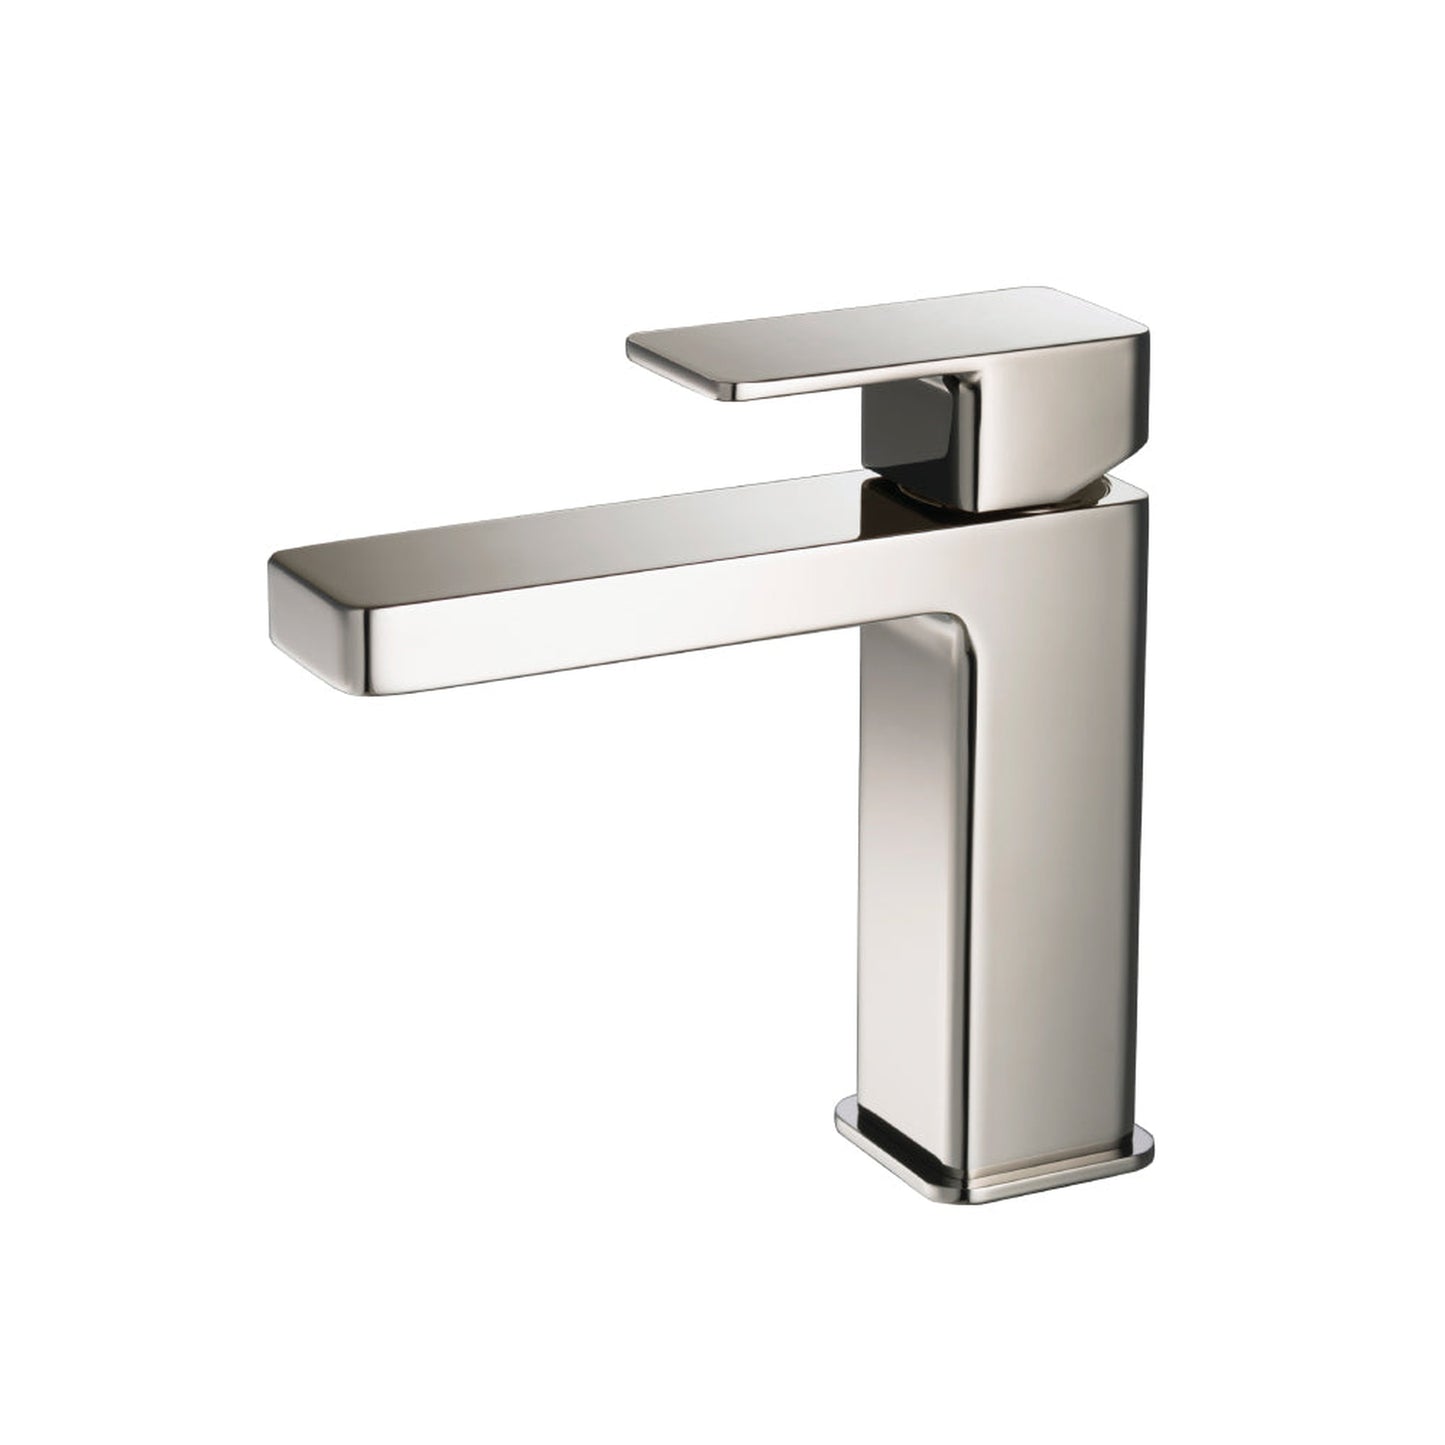 Isenberg Serie 196 7" Single-Hole Polished Nickel PVD Deck-Mounted Bathroom Sink Faucet With Pop-Up Drain and Adjustable Hot Limit Safety Stop